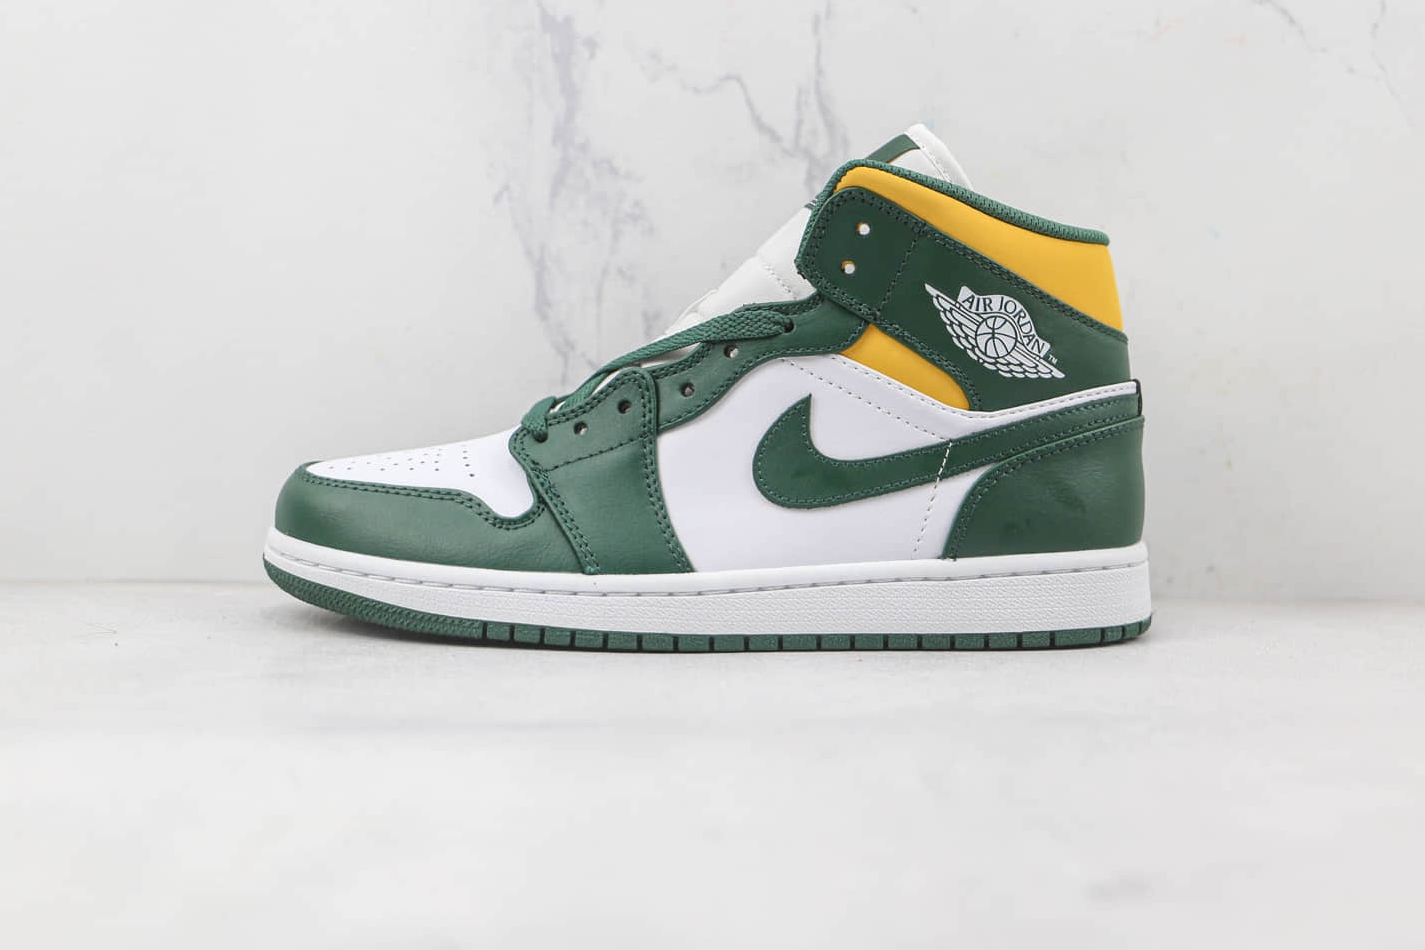 Air Jordan 1 Mid 'Sonics 2021' 554724-371 - Stylish Sneakers for Basketball Enthusiasts